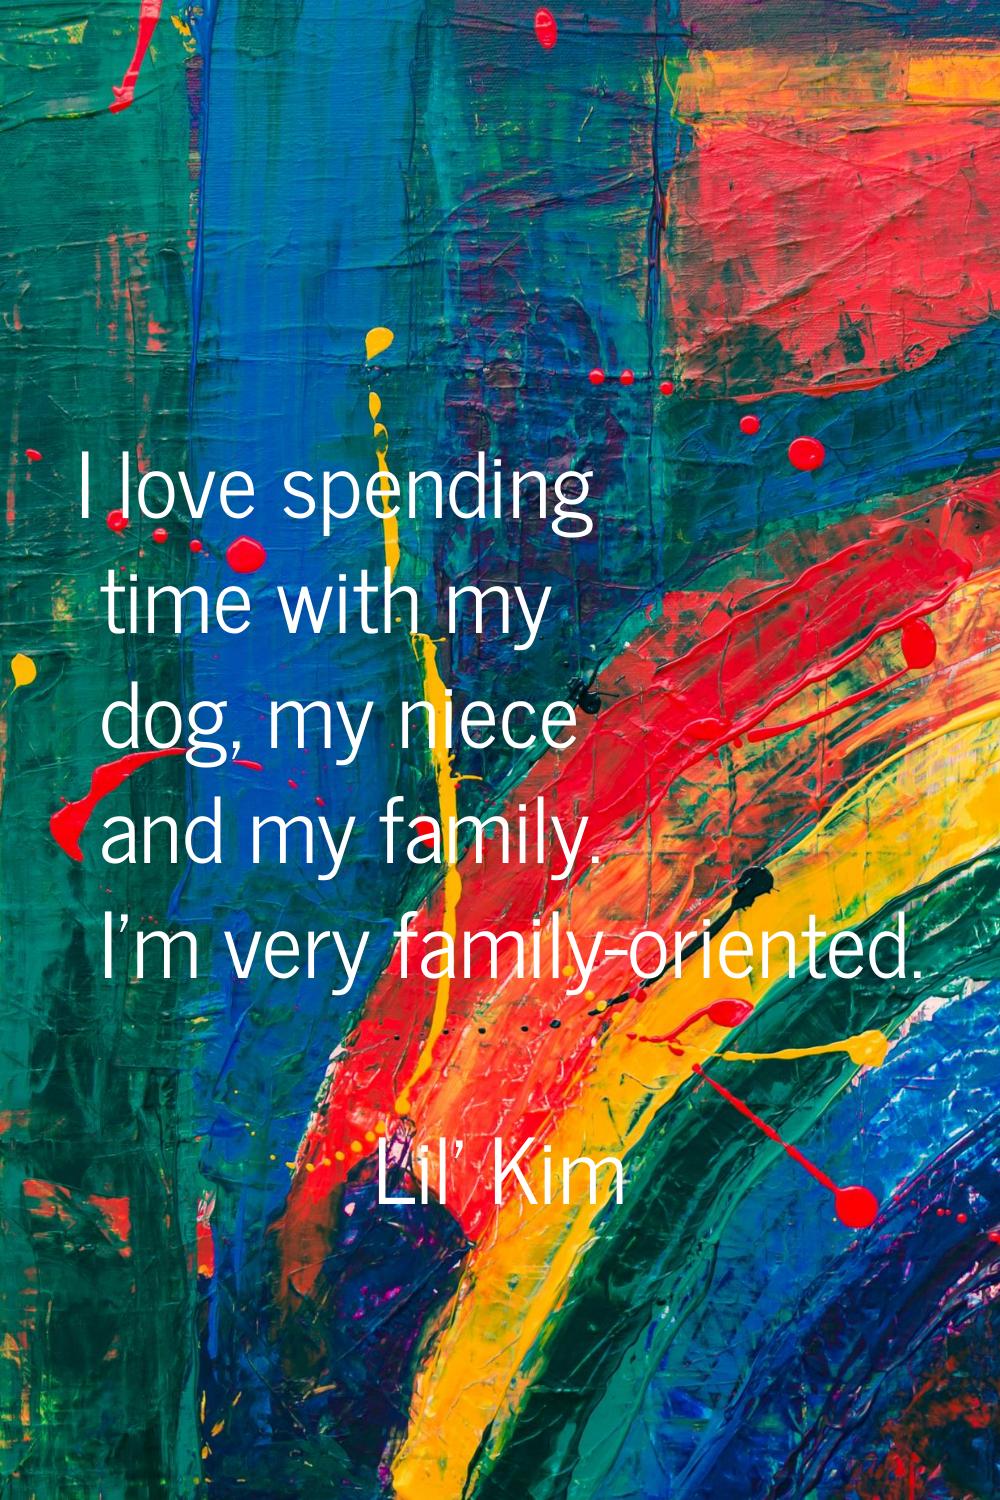 I love spending time with my dog, my niece and my family. I'm very family-oriented.